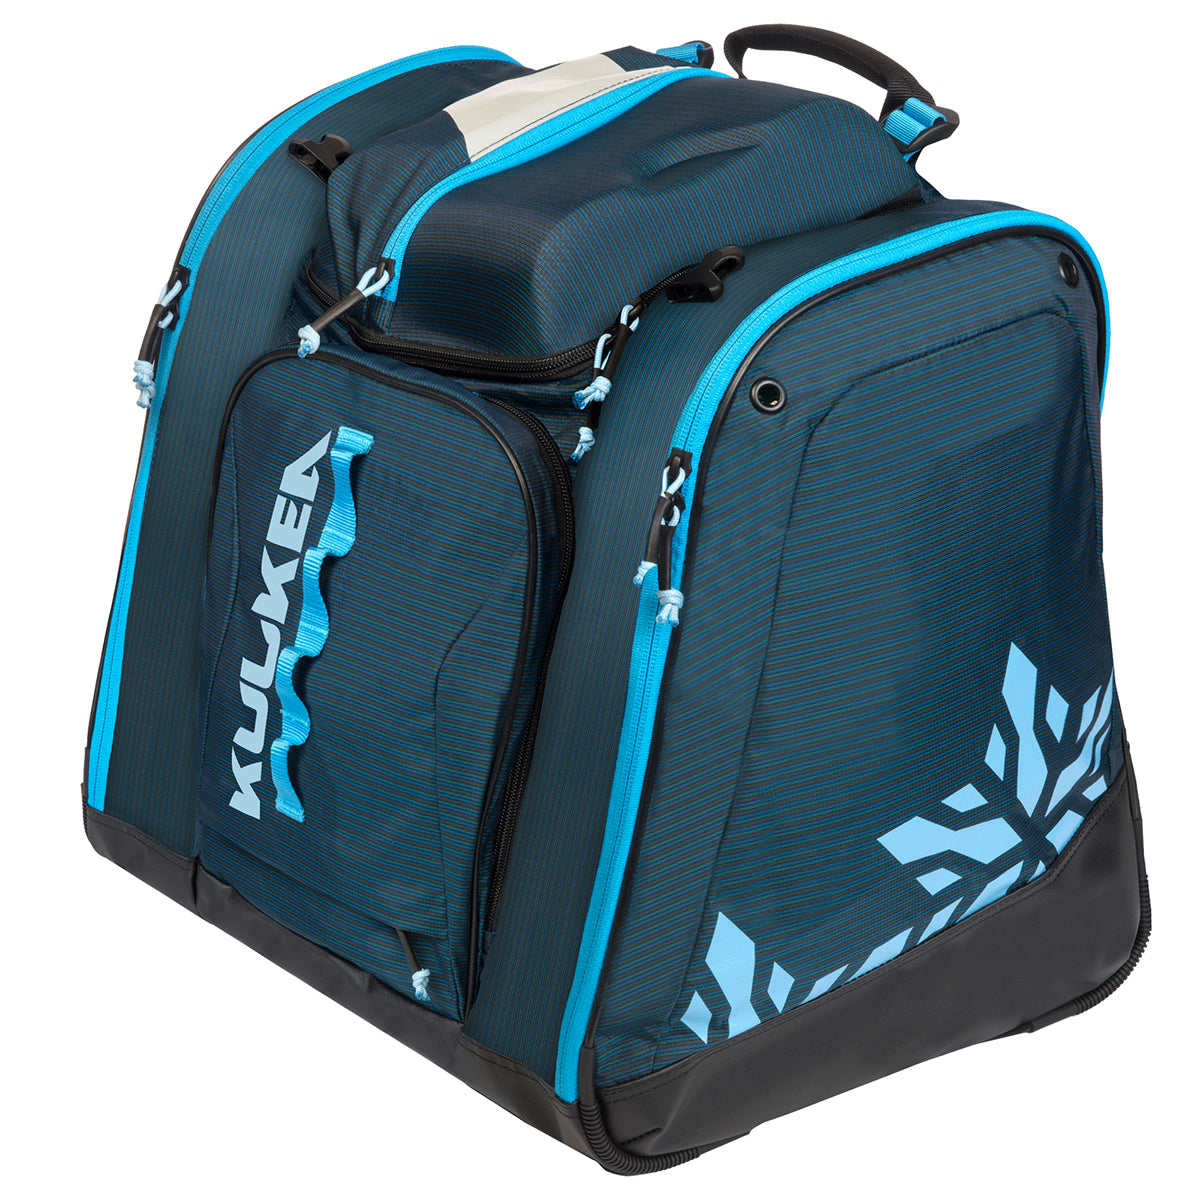 Kulkea boot bag in blue with light blue accents and snowflake designs, tons of compartments, large enough to fit ski boots and most if not all your other ski gear including helmet.